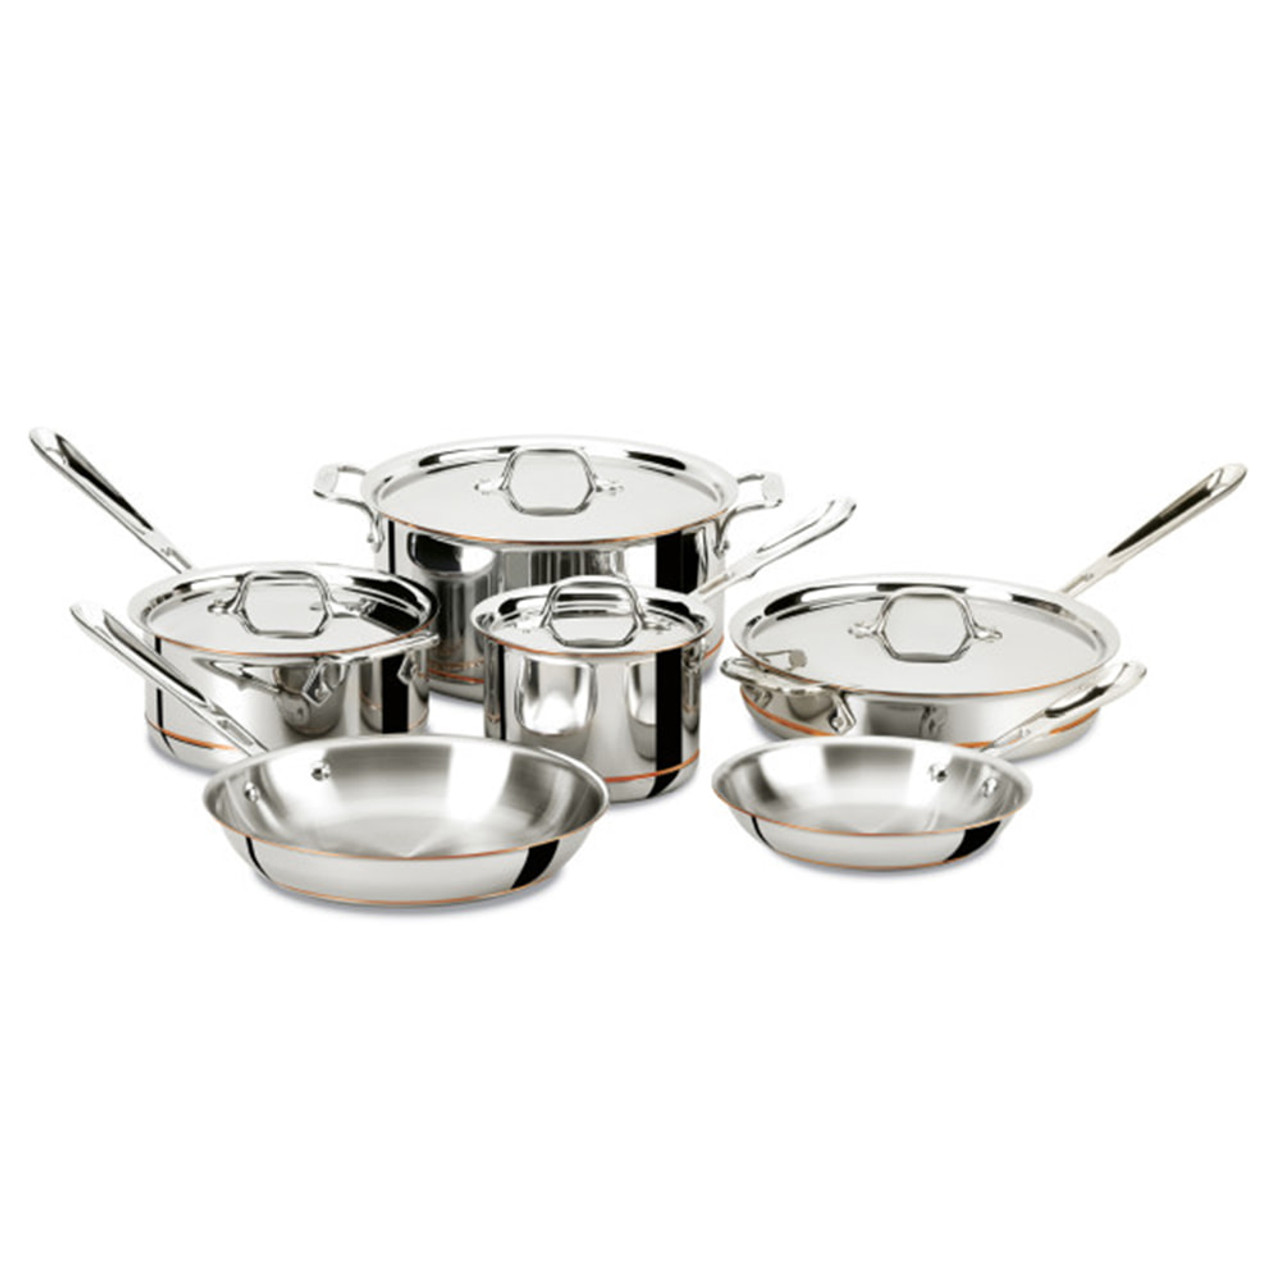  All-Clad D3 3-Ply Stainless Steel Cookware Set 7 Piece  Induction Oven Broiler Safe 600F Pots and Pans, Cookware Silver: All Clad  Pans: Home & Kitchen